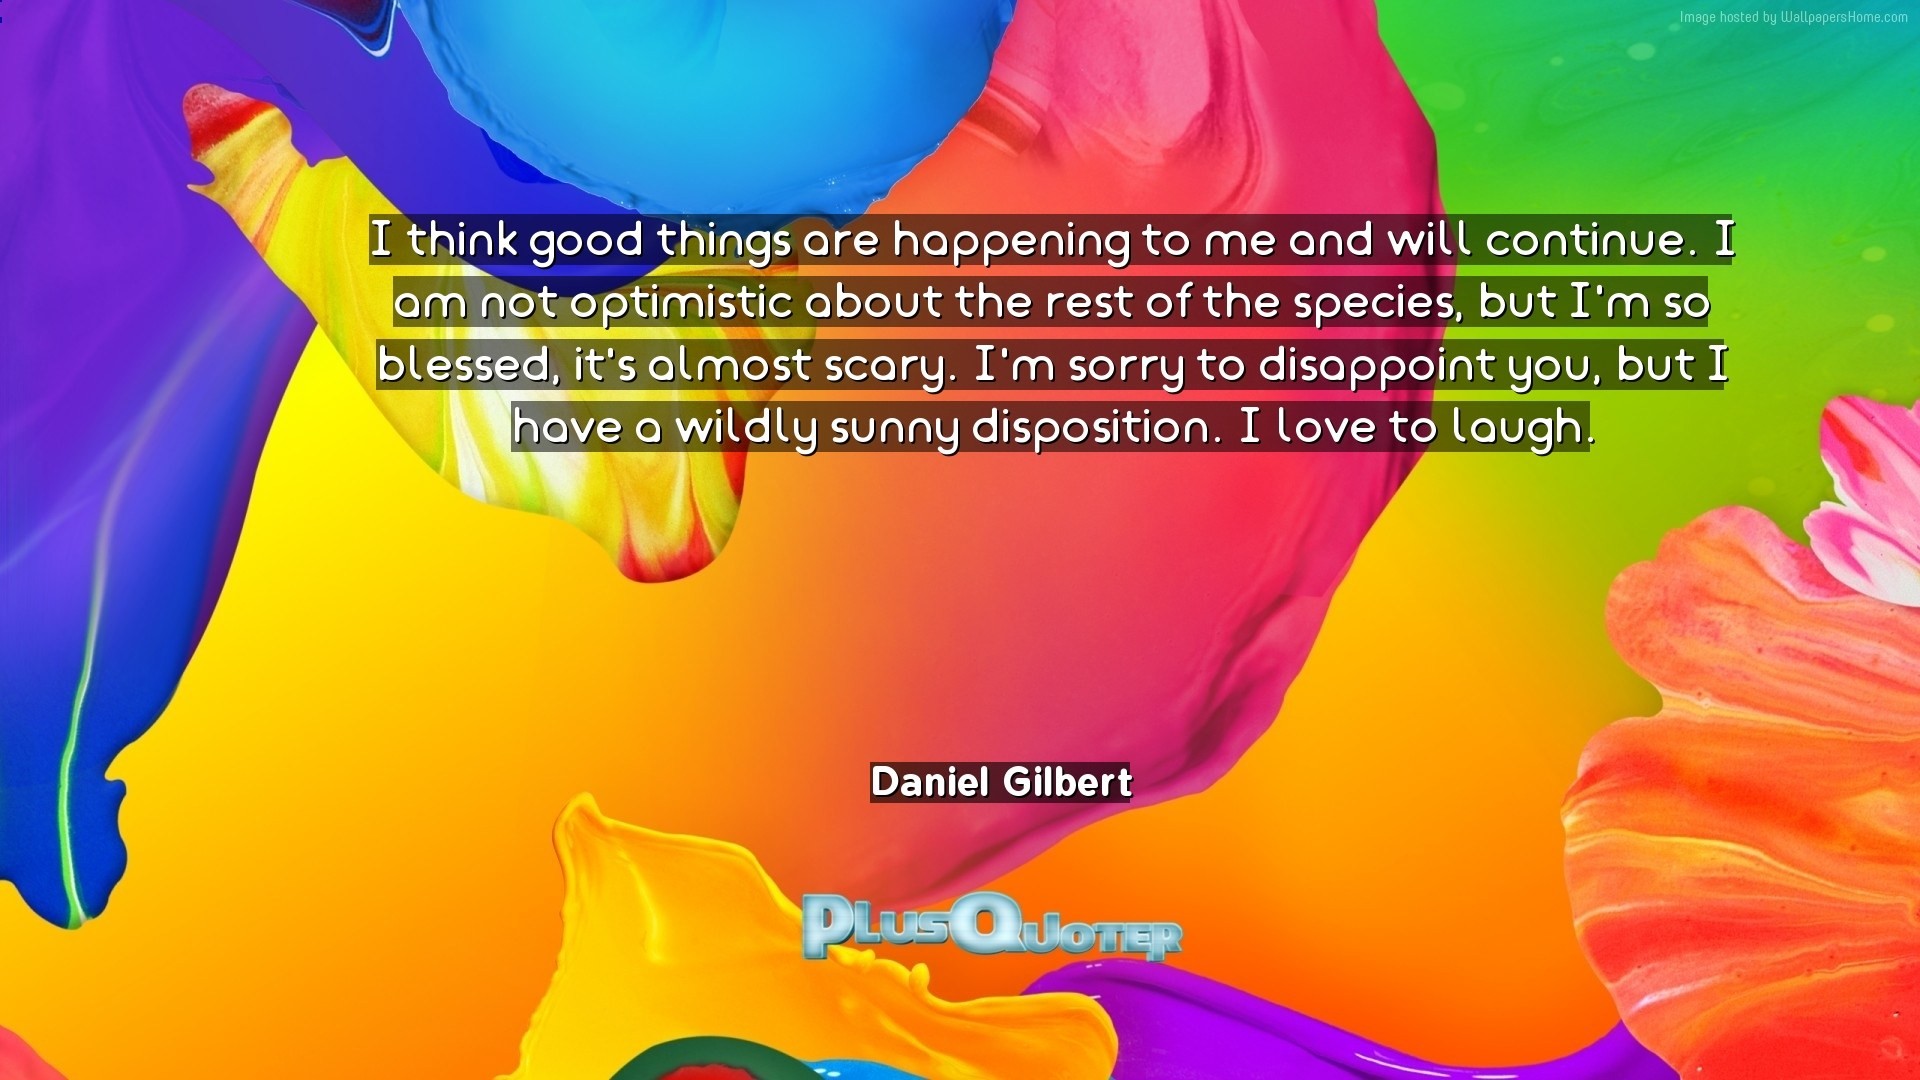 1920x1080 Download Wallpaper with inspirational Quotes- "I think good things are  happening to me and